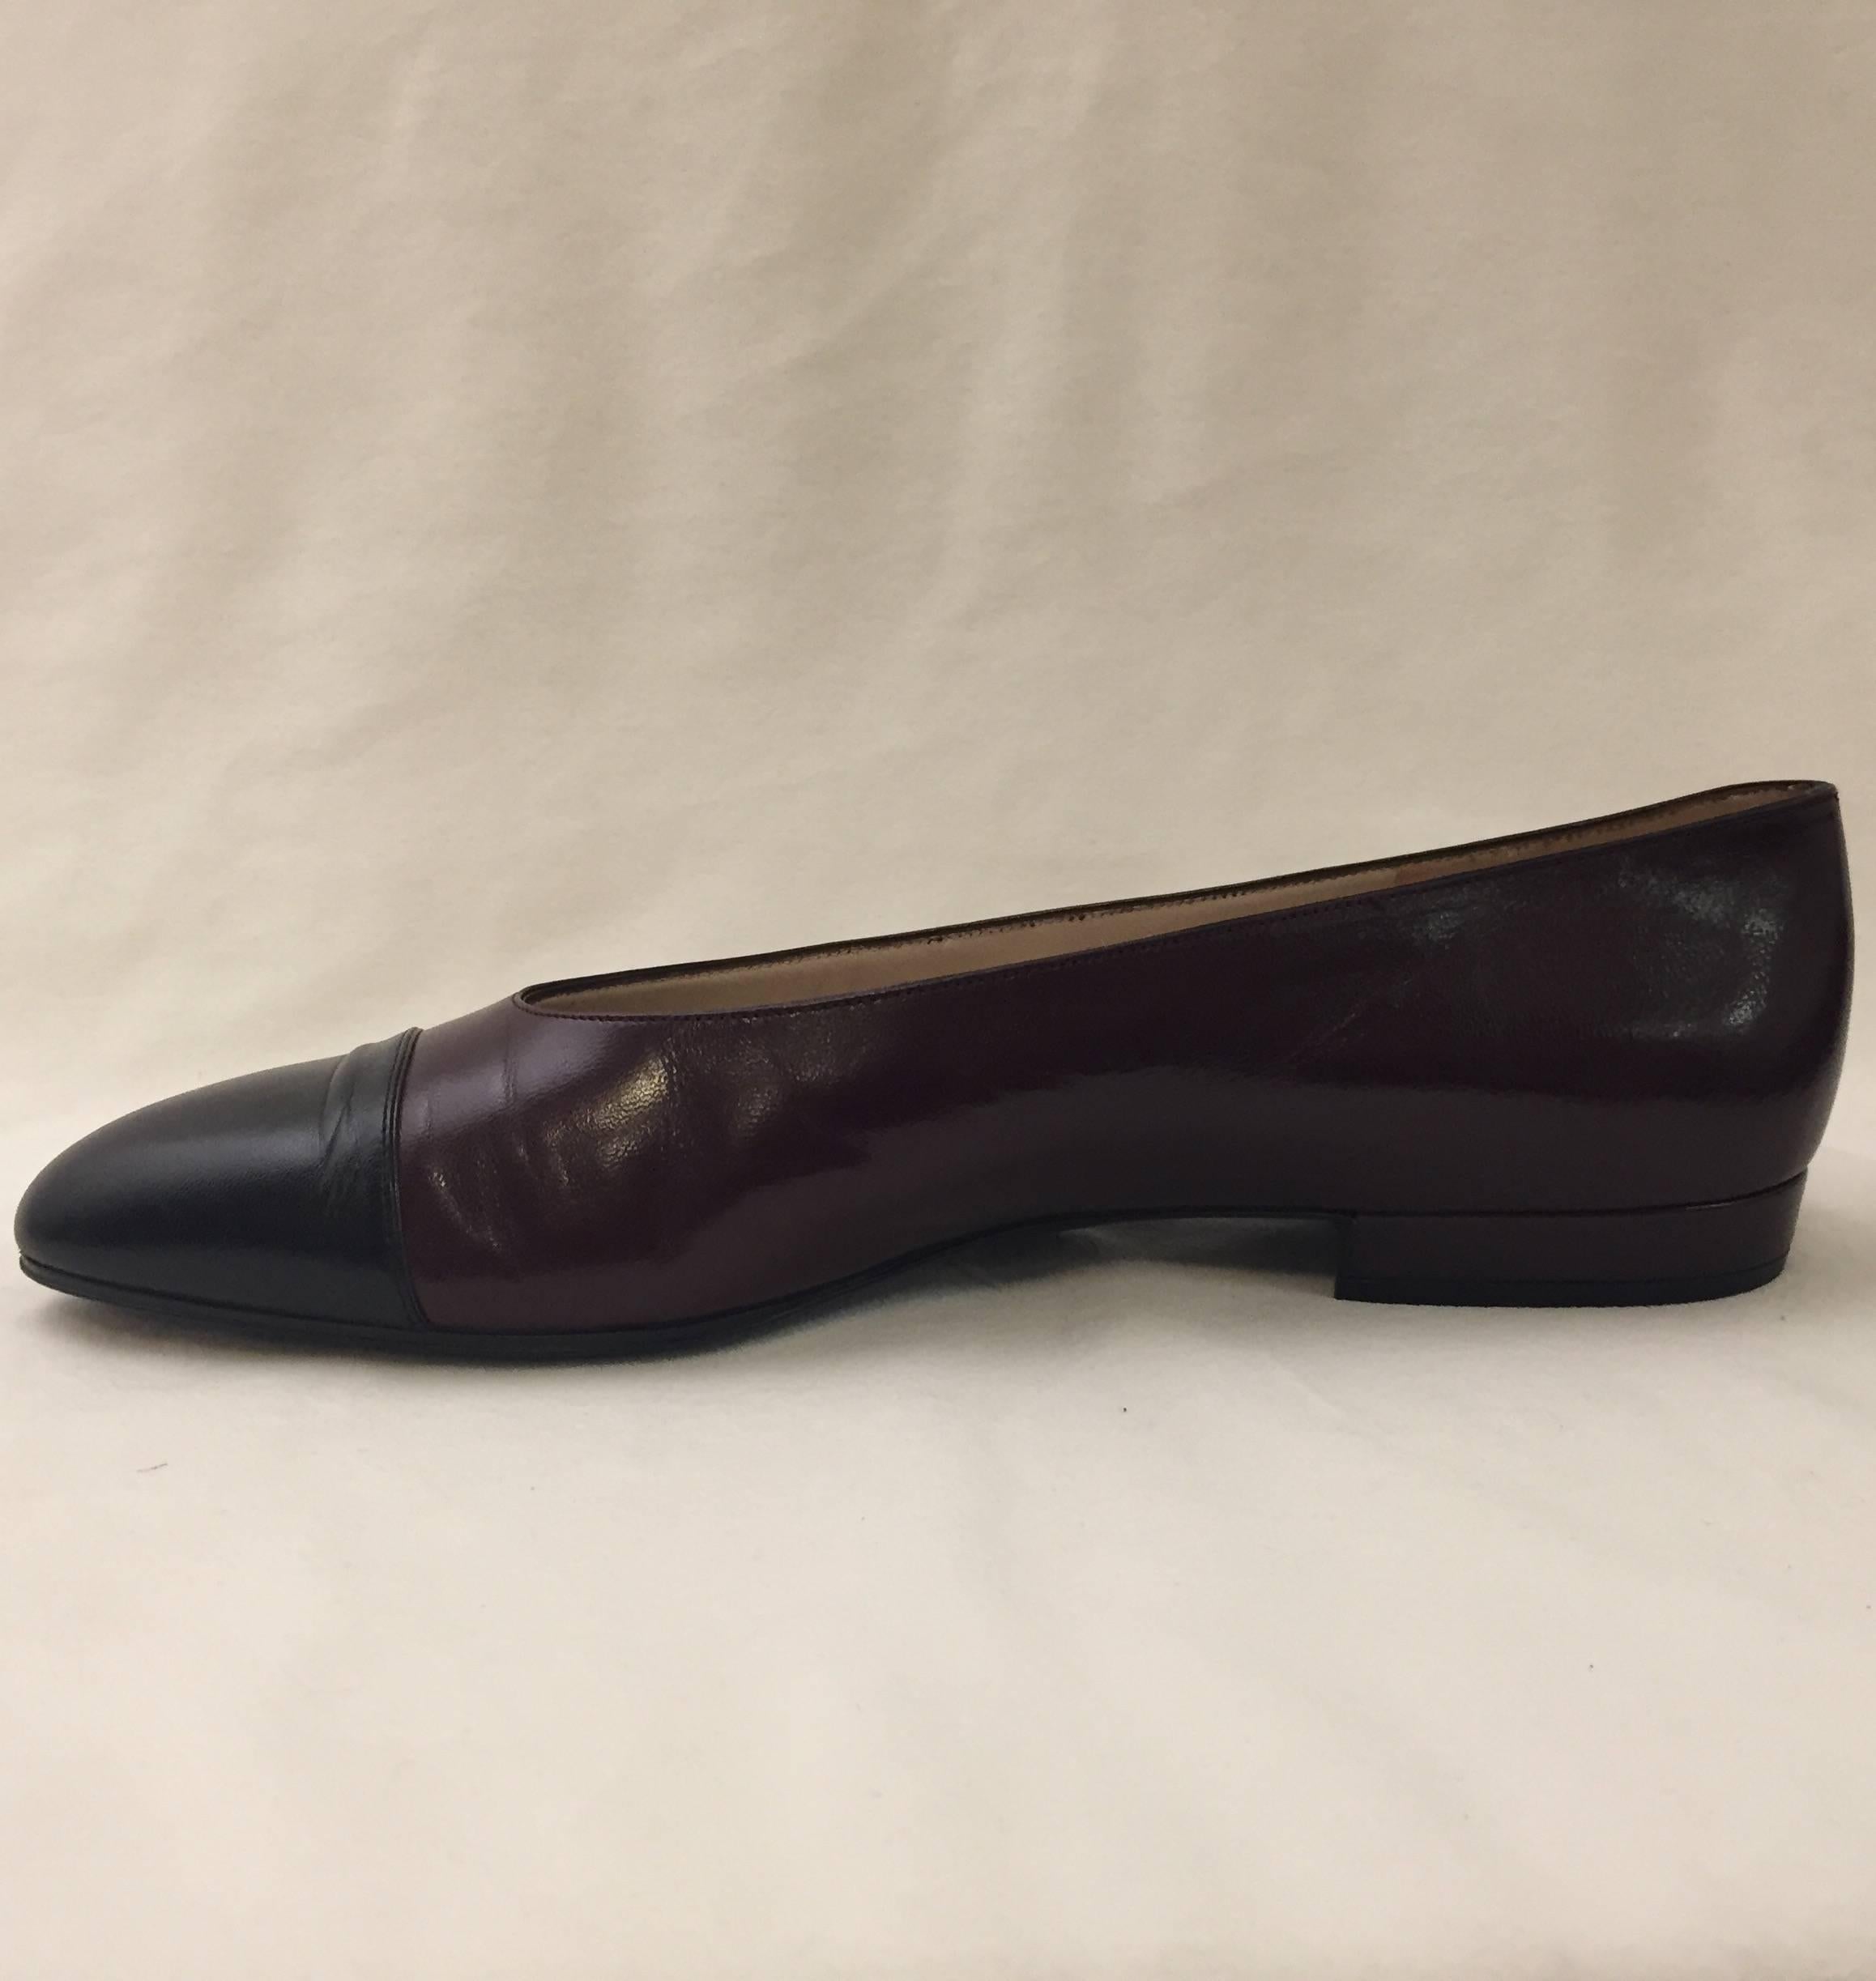 The passage of time has not made these shoes any less desirable!  Another generation of women have fallen in love with these chic flats in deep burgundy leather with signature black leather caps.  Finished with tan leather soles, insoles and lining.